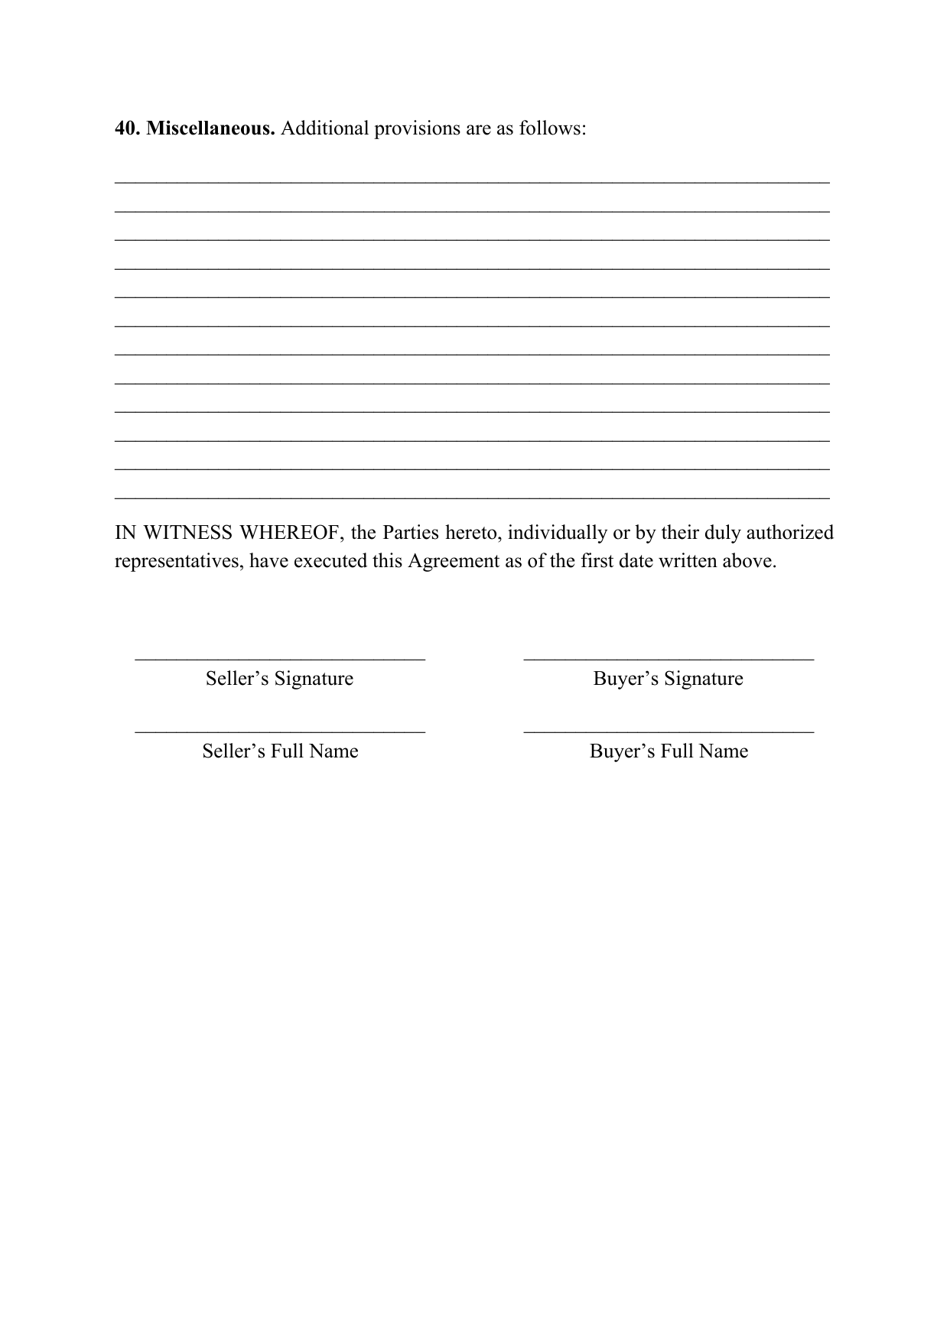 Ohio Real Estate Purchase Agreement Template Fill Out Sign Online